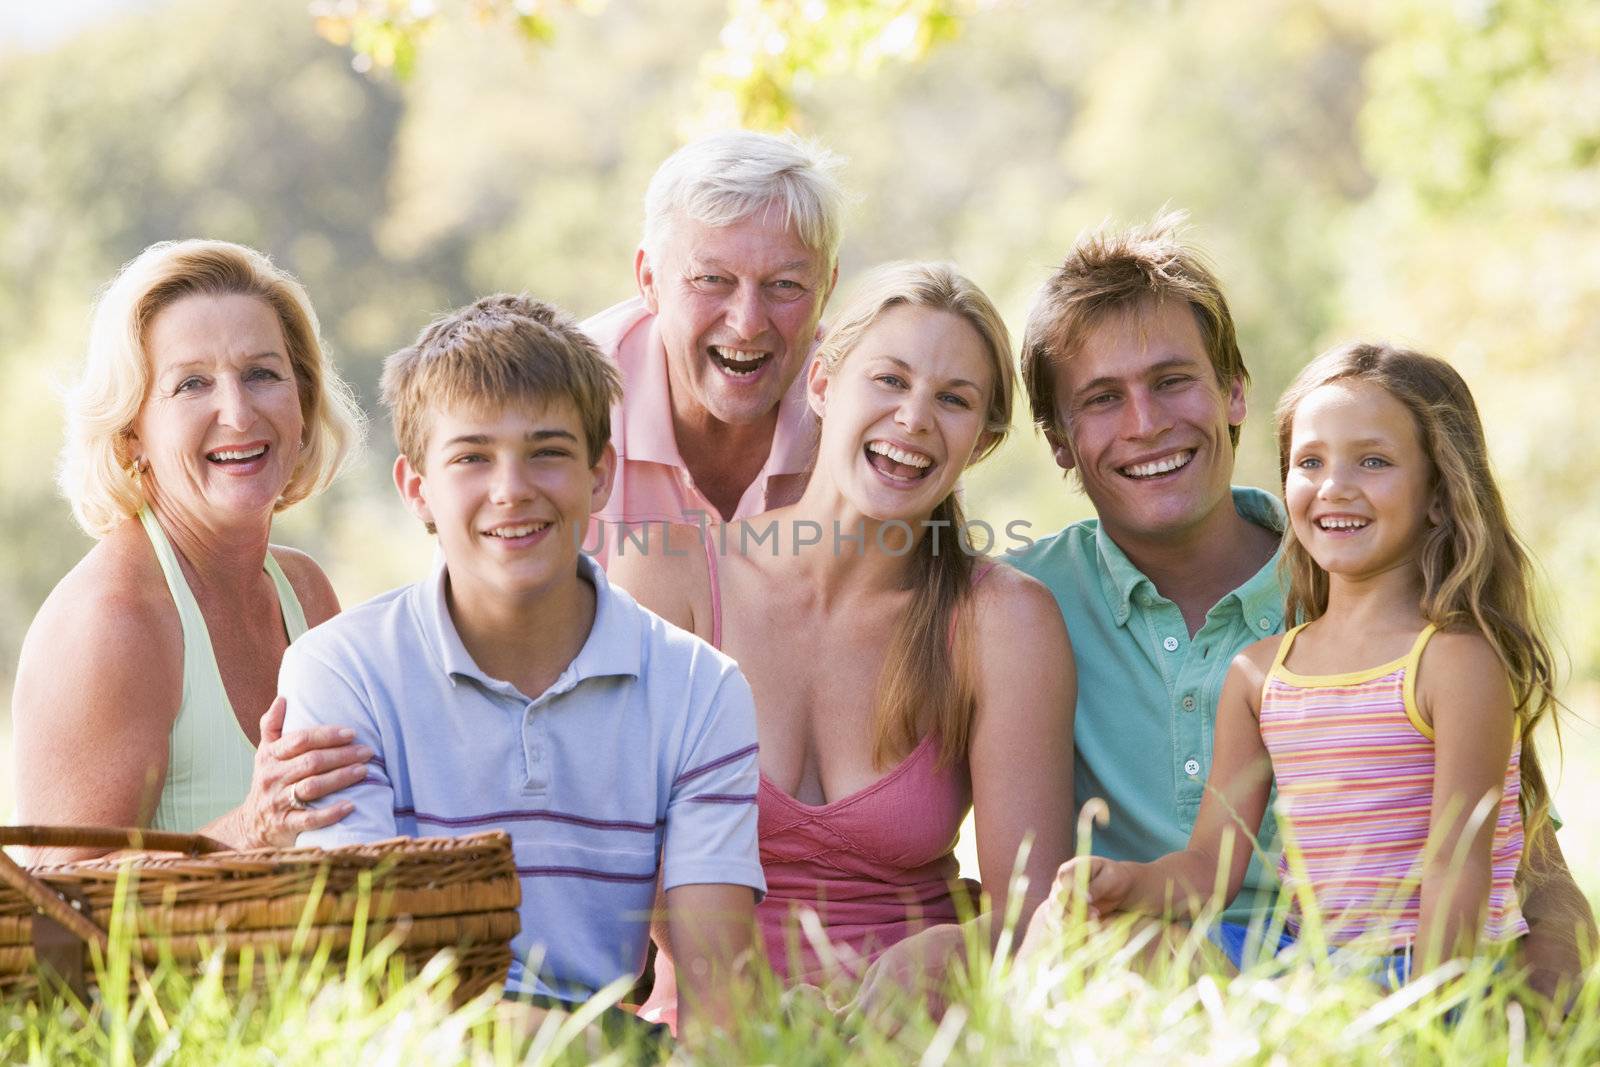 Family at a picnic smiling by MonkeyBusiness